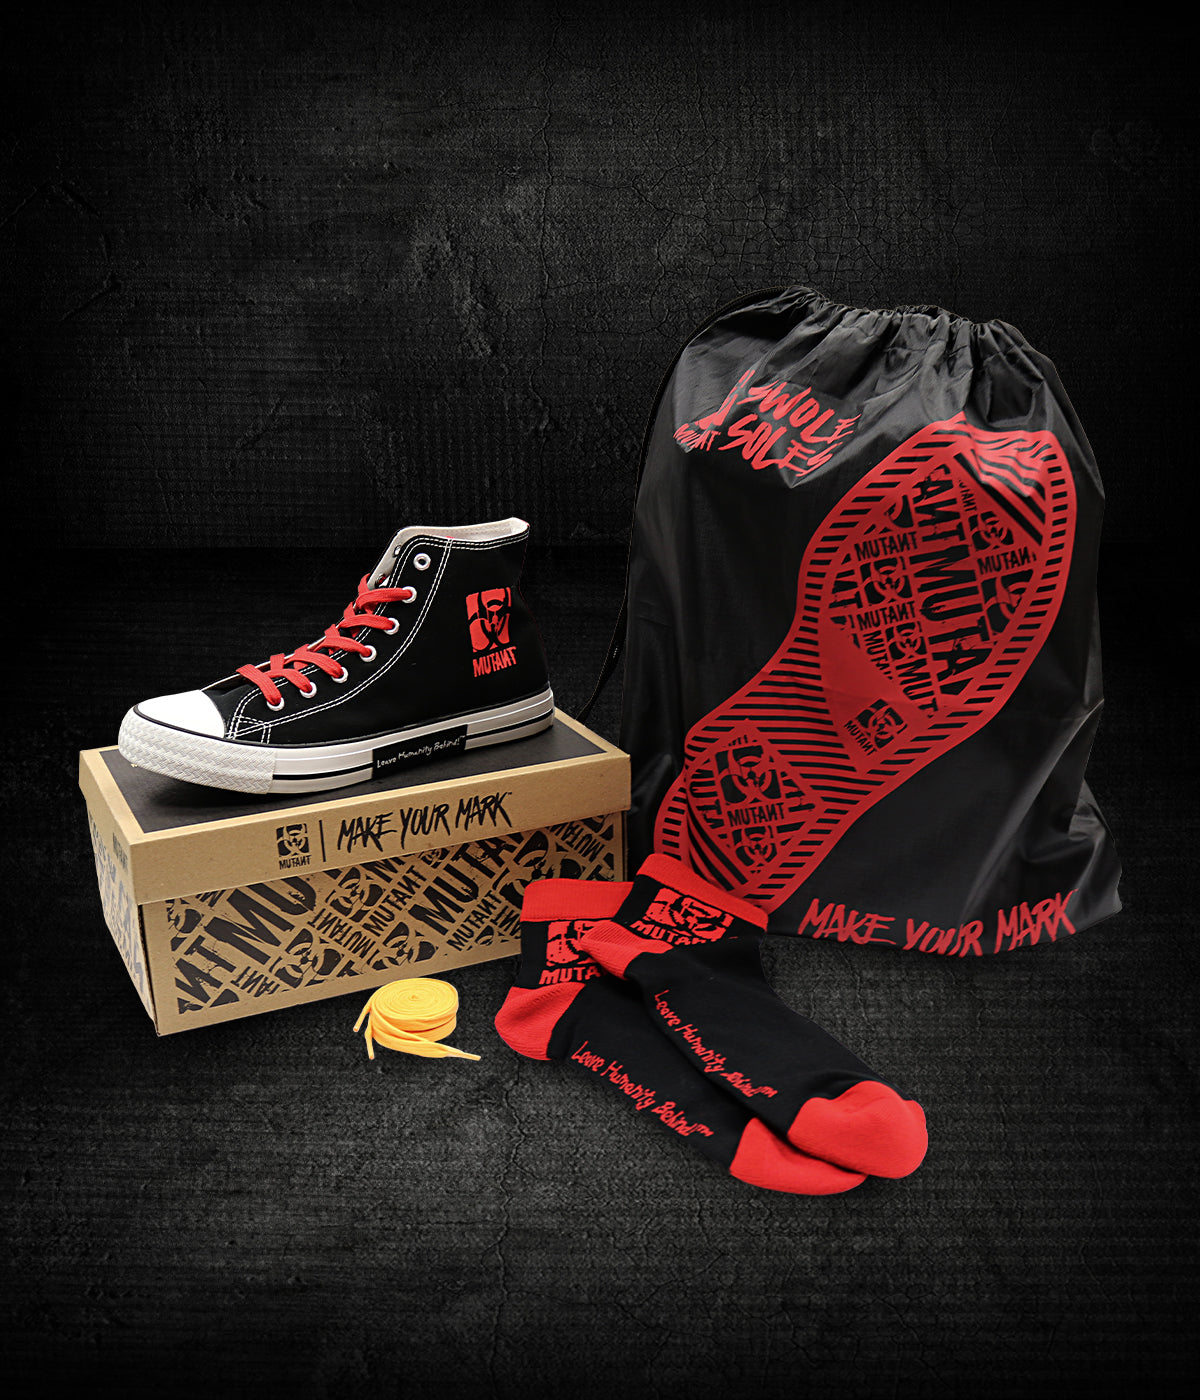 SWOLE SOLES™ High Top Sneaker Limited Edition Pack